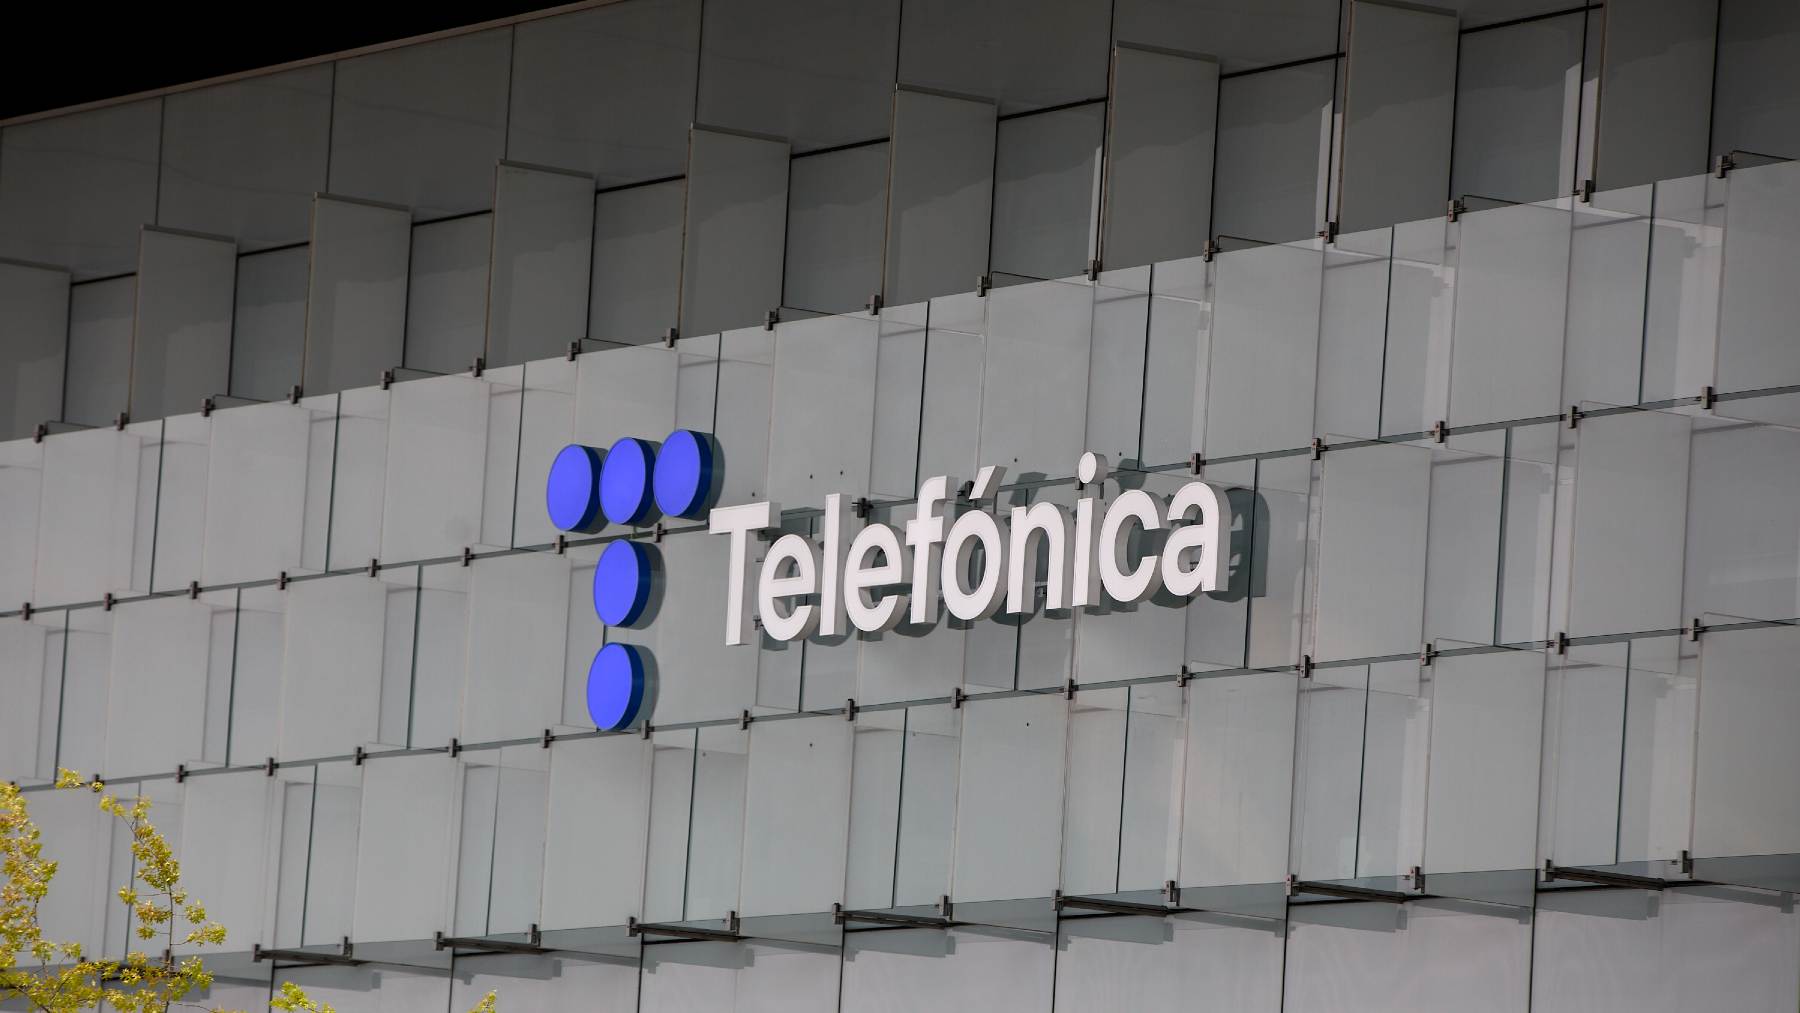 The telecommunications company Telefónica plans to present its new metaverse and web3 products and recommendations in September